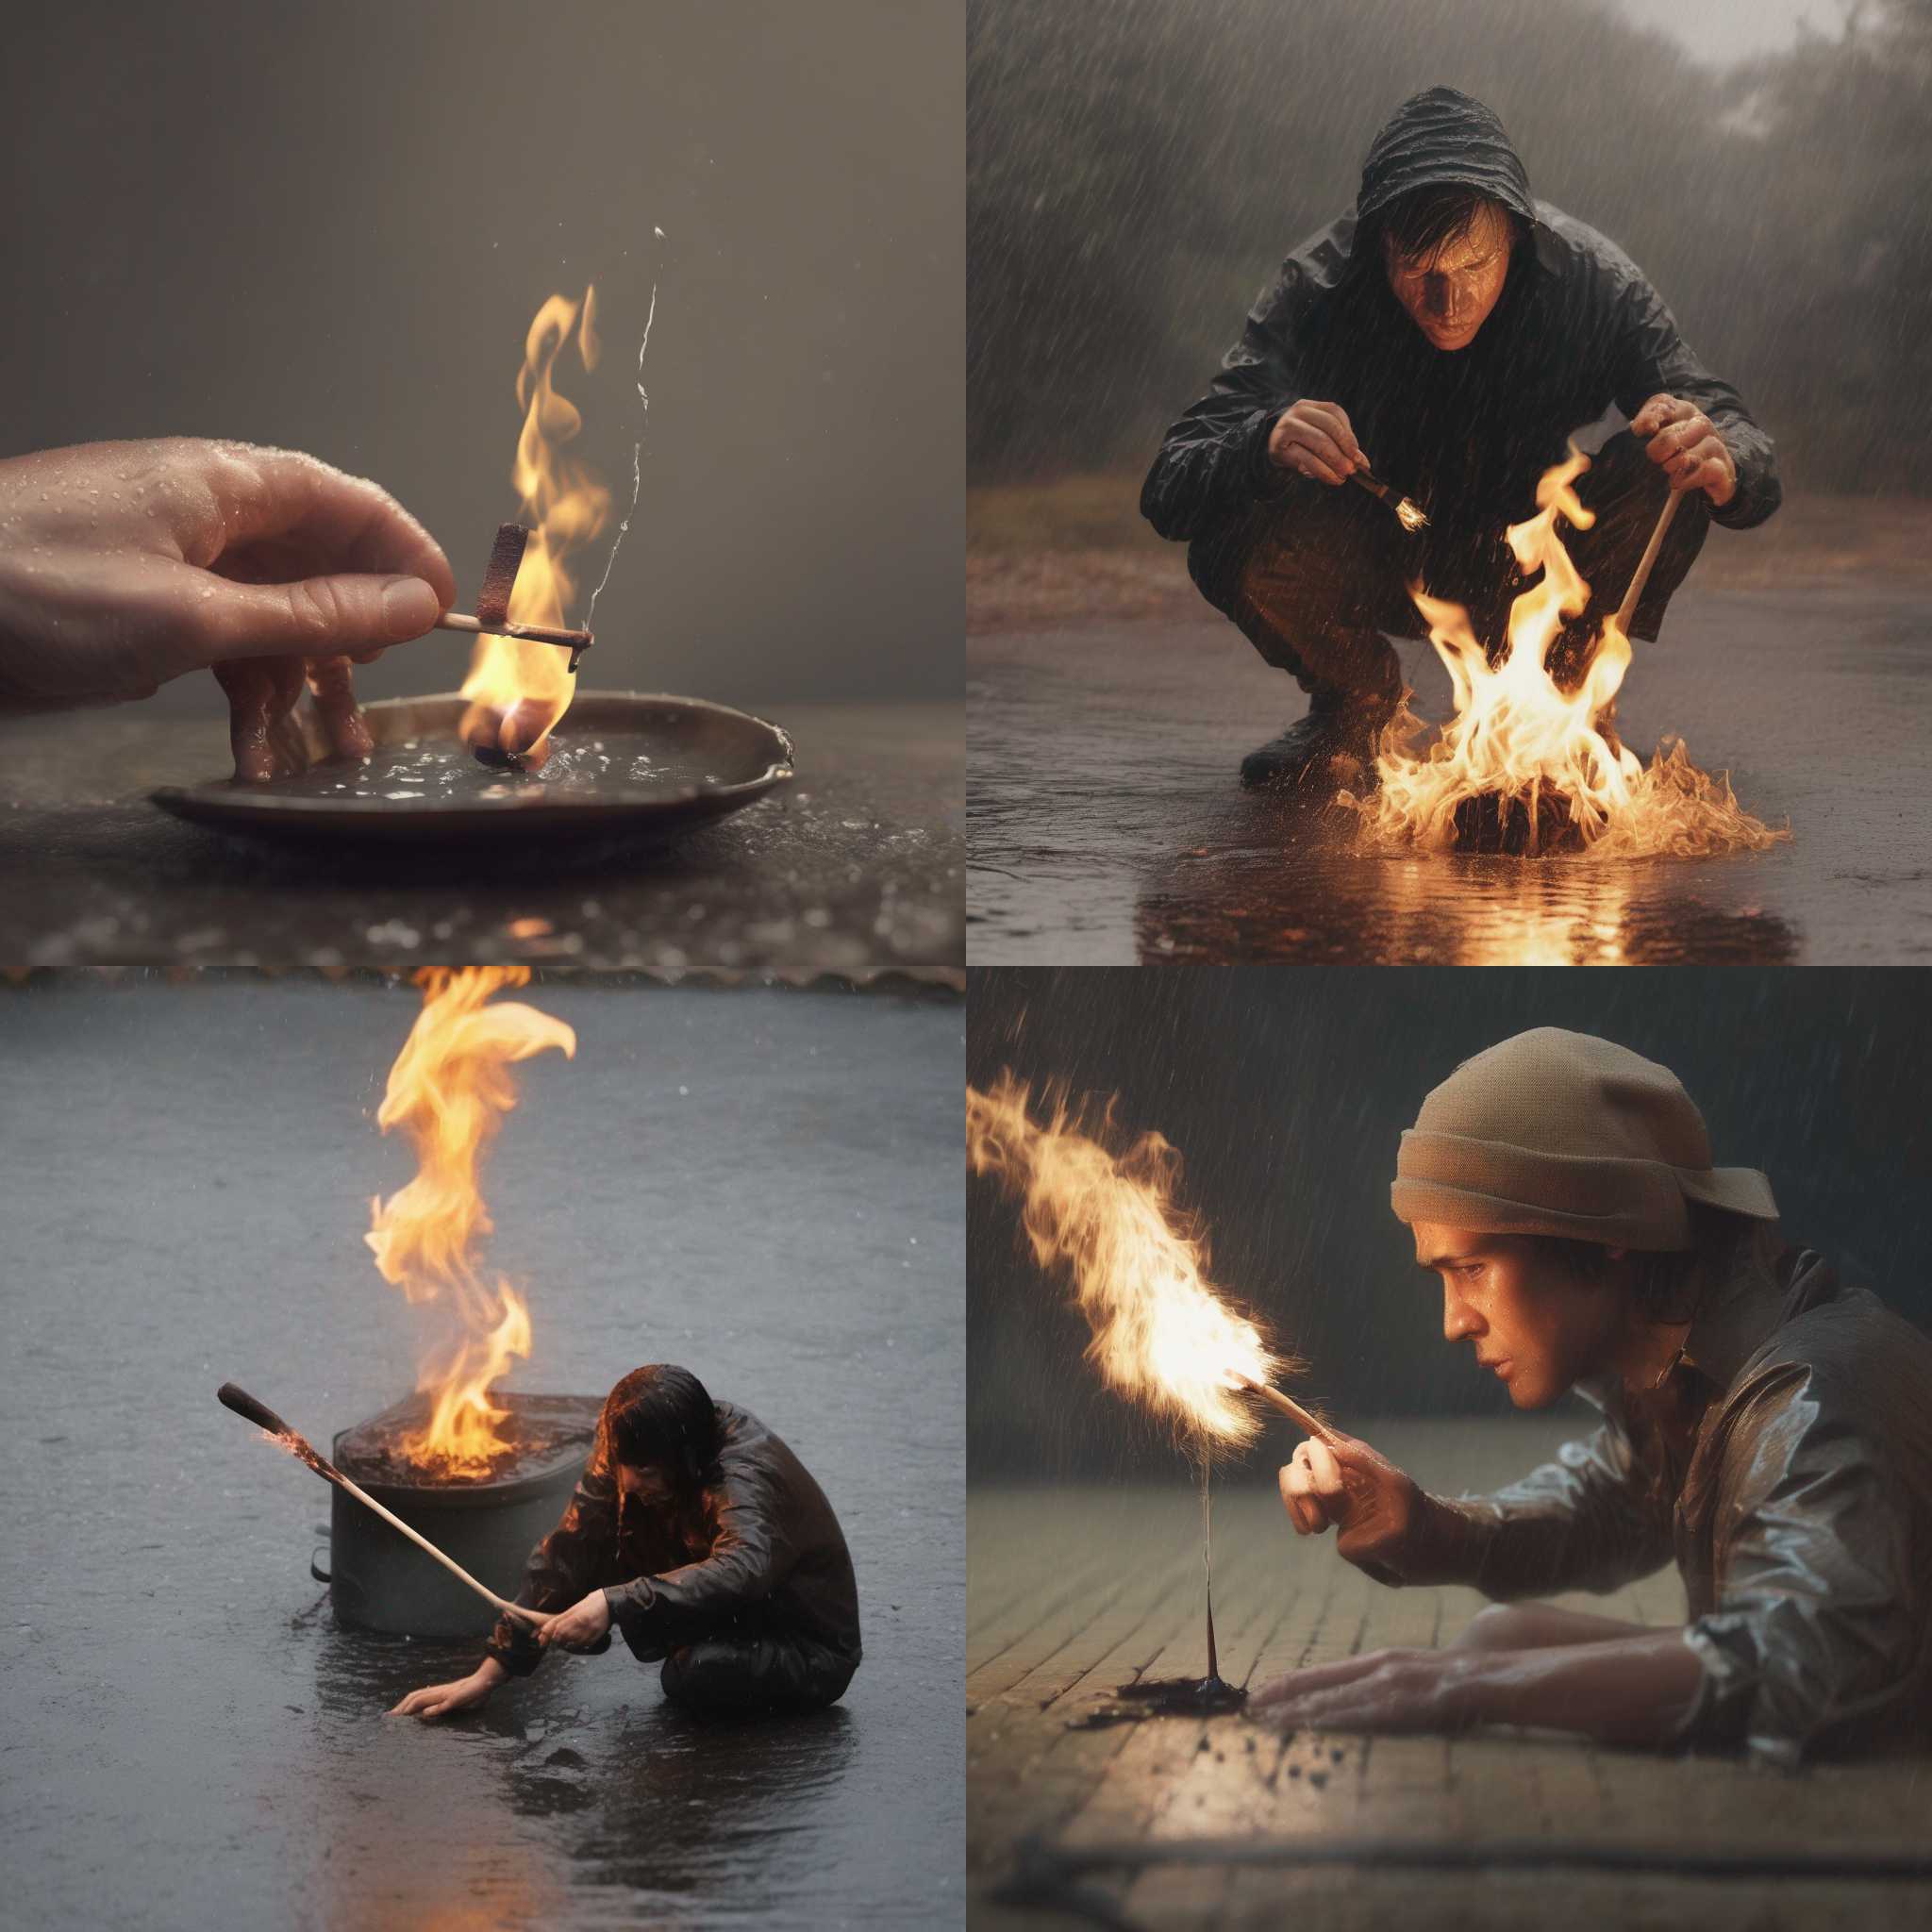 A person igniting a wet match